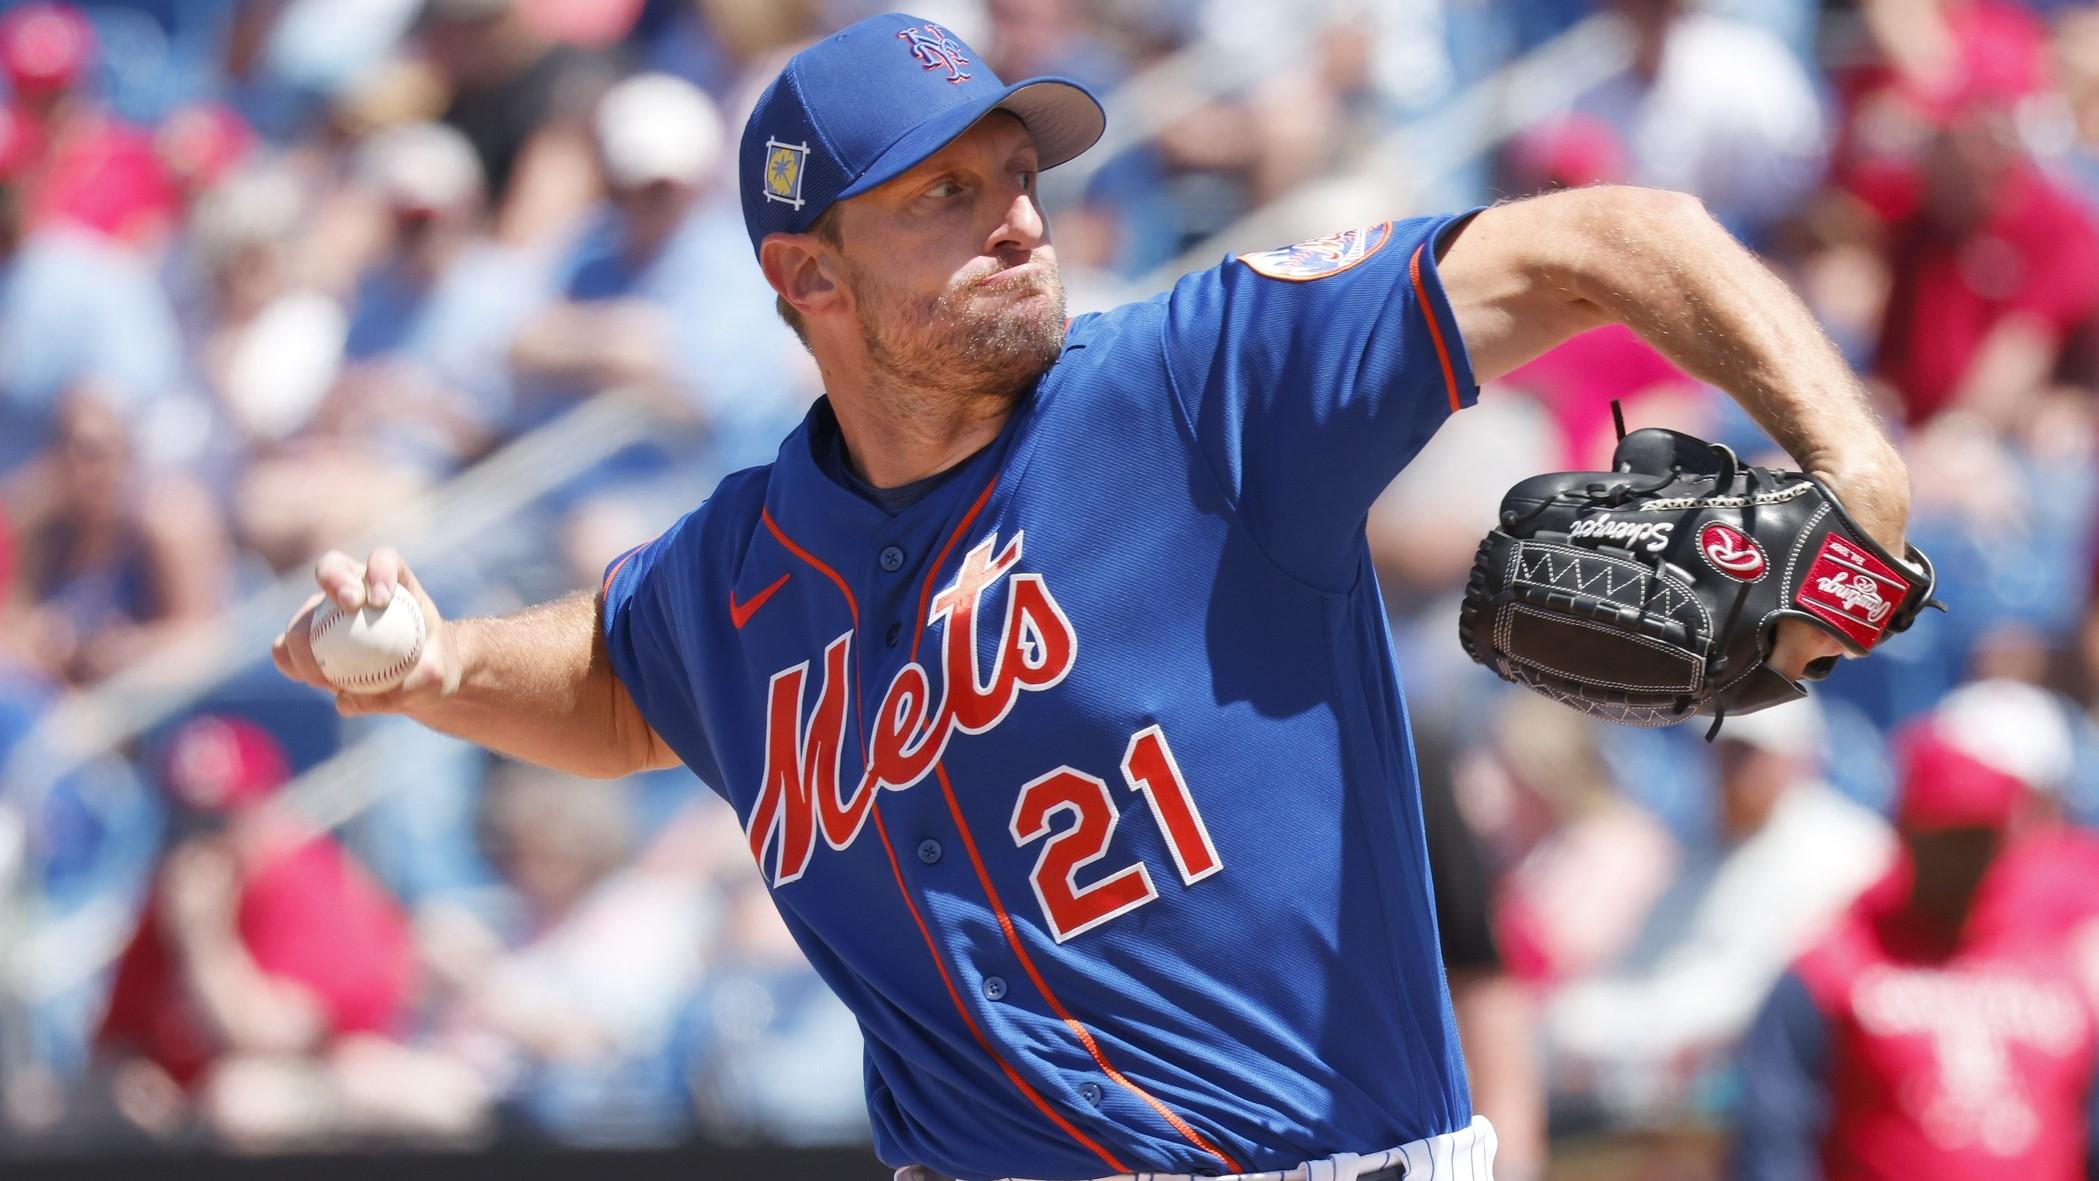 Mar 27, 2022; Port St. Lucie, Florida, USA; New York Mets starting pitcher Max Scherzer (21) throws a pitch during the fourth inning of a spring training game against the St. Louis Cardinals at Clover Park. / Reinhold Matay-USA TODAY Sports